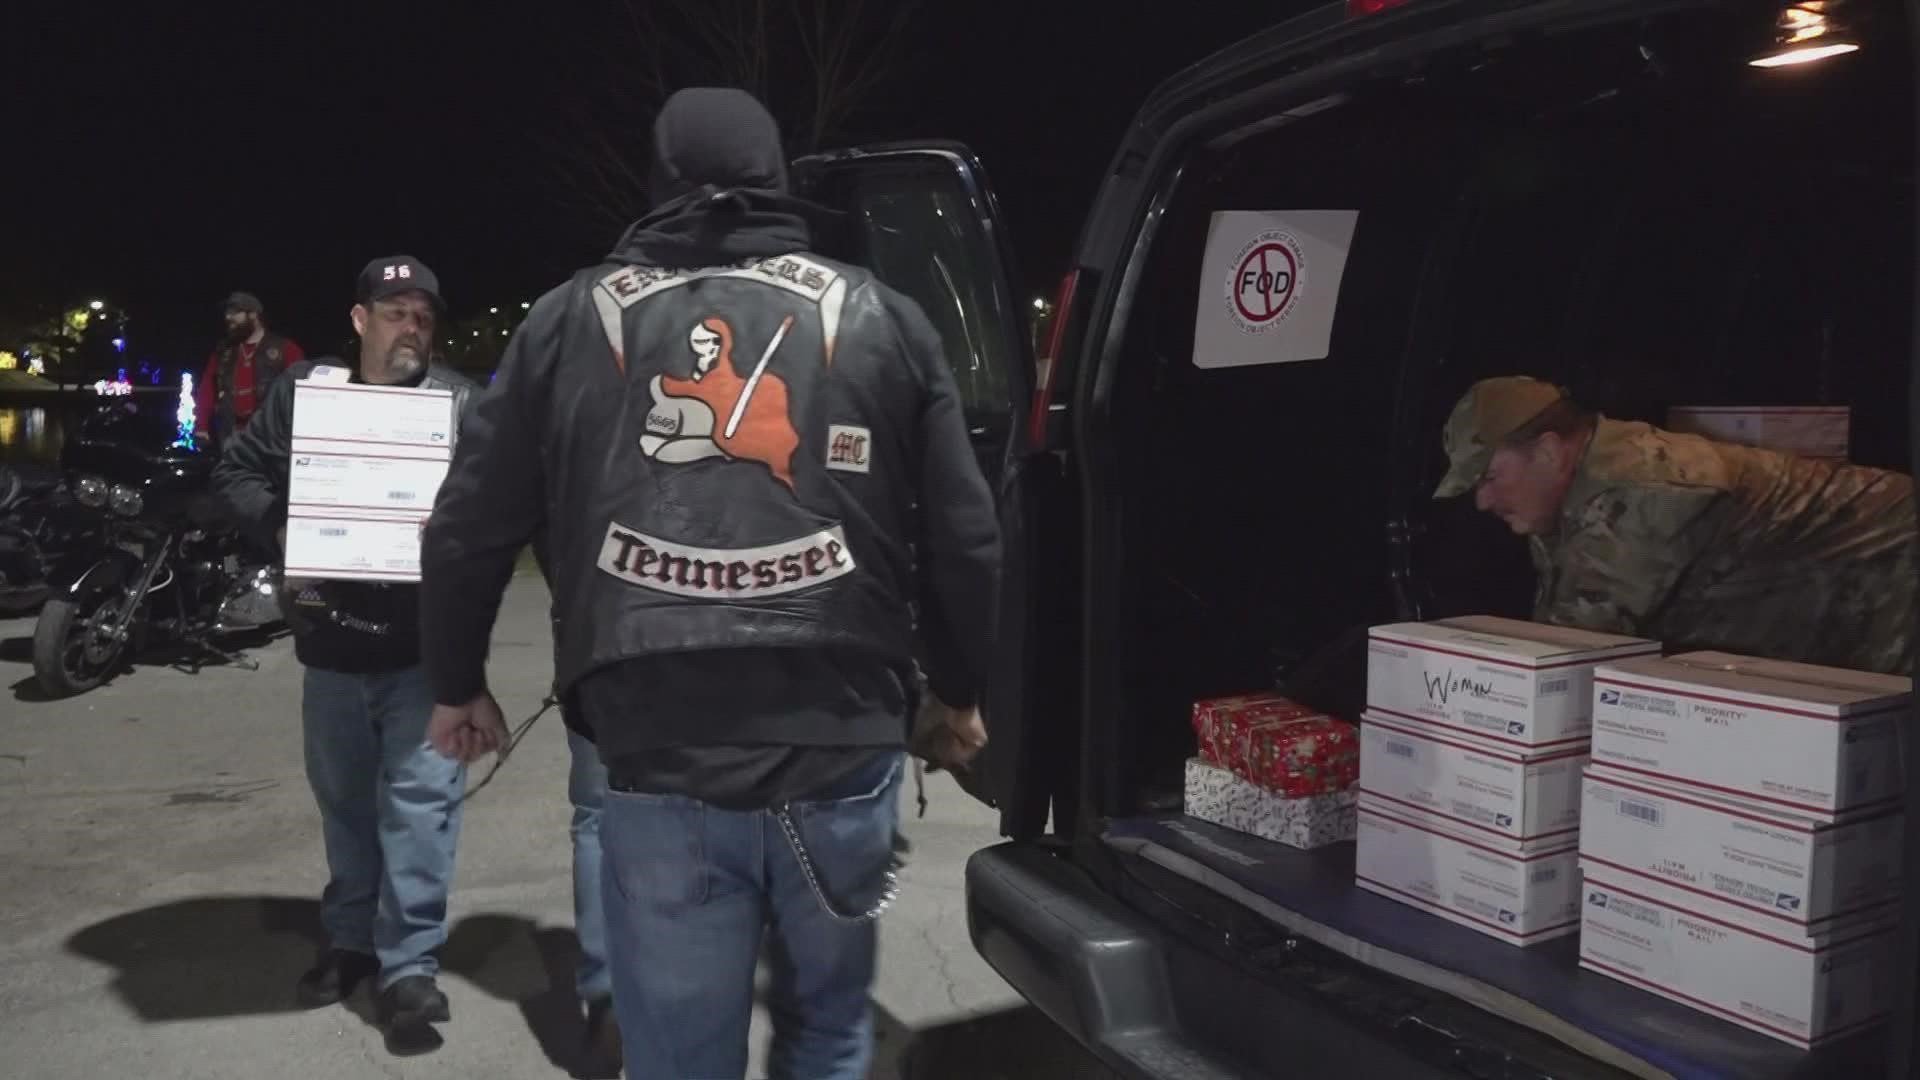 The "Knoxville Roughnecks Motorcycle Club" gathered donations and will send care packages to servicemembers deployed overseas for the fifth year in a row.